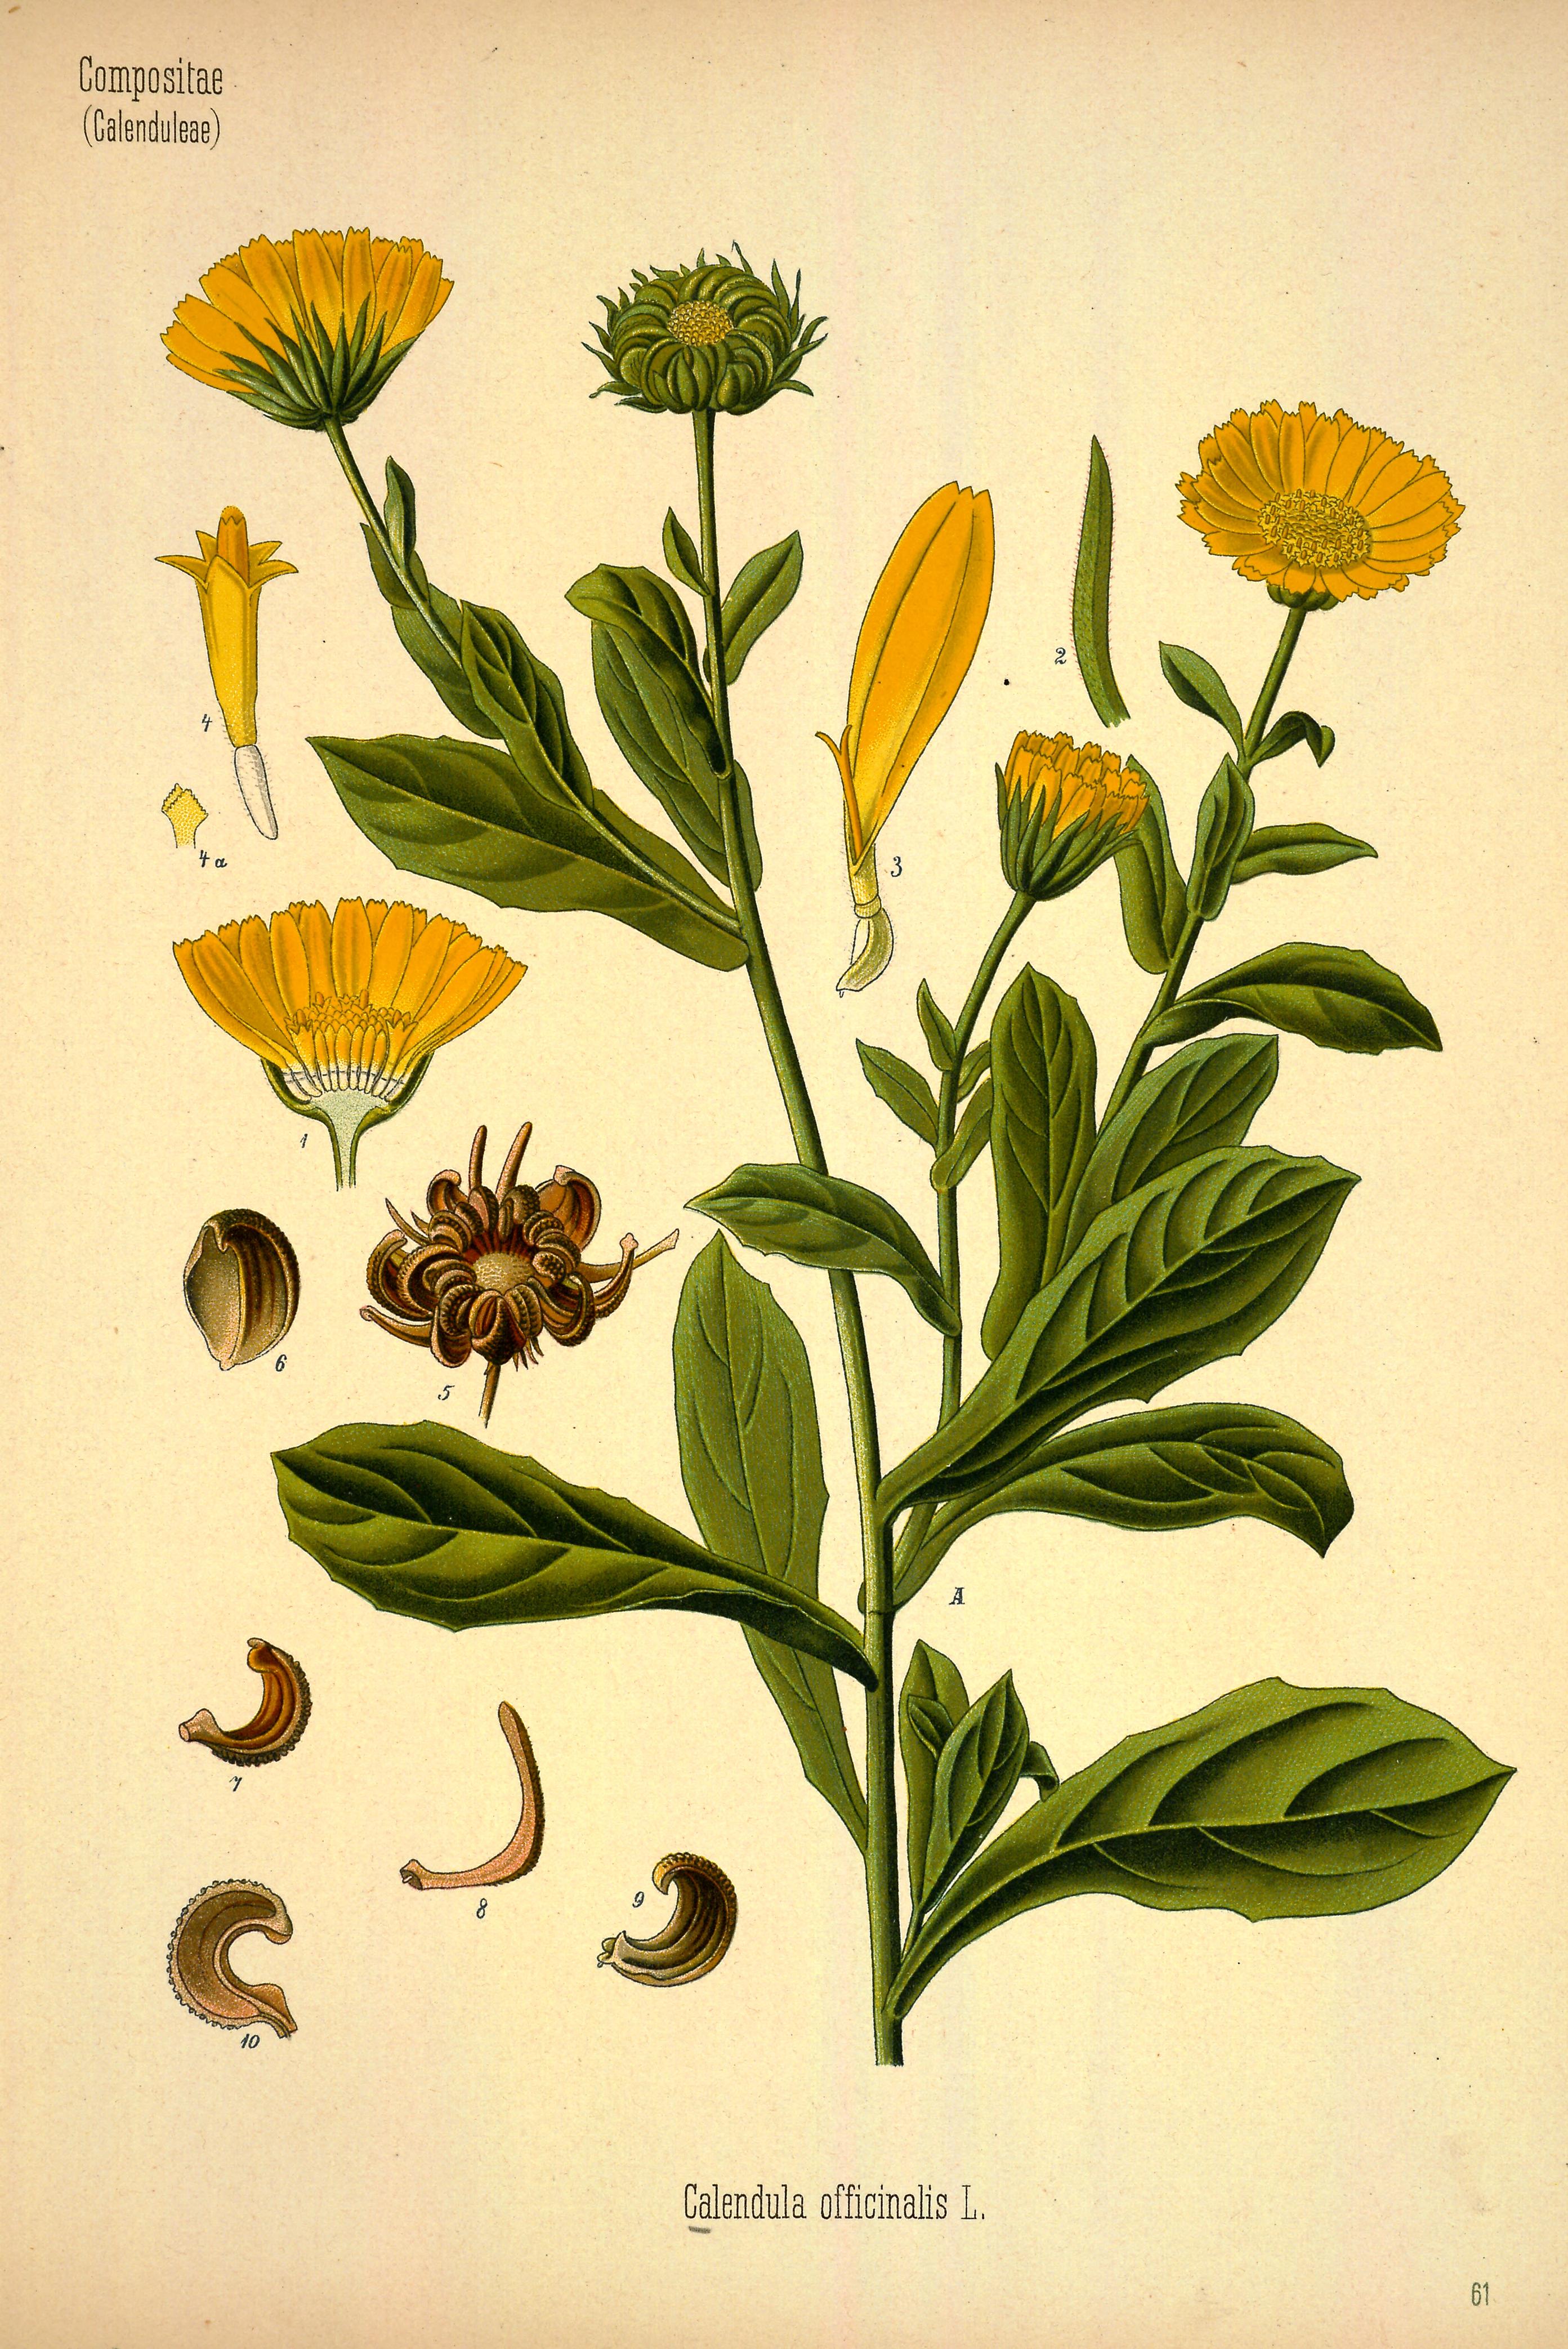 Chromolithograph of Calendula by Walther Otto Müller, C. F. Schmidt, and K. Gunther